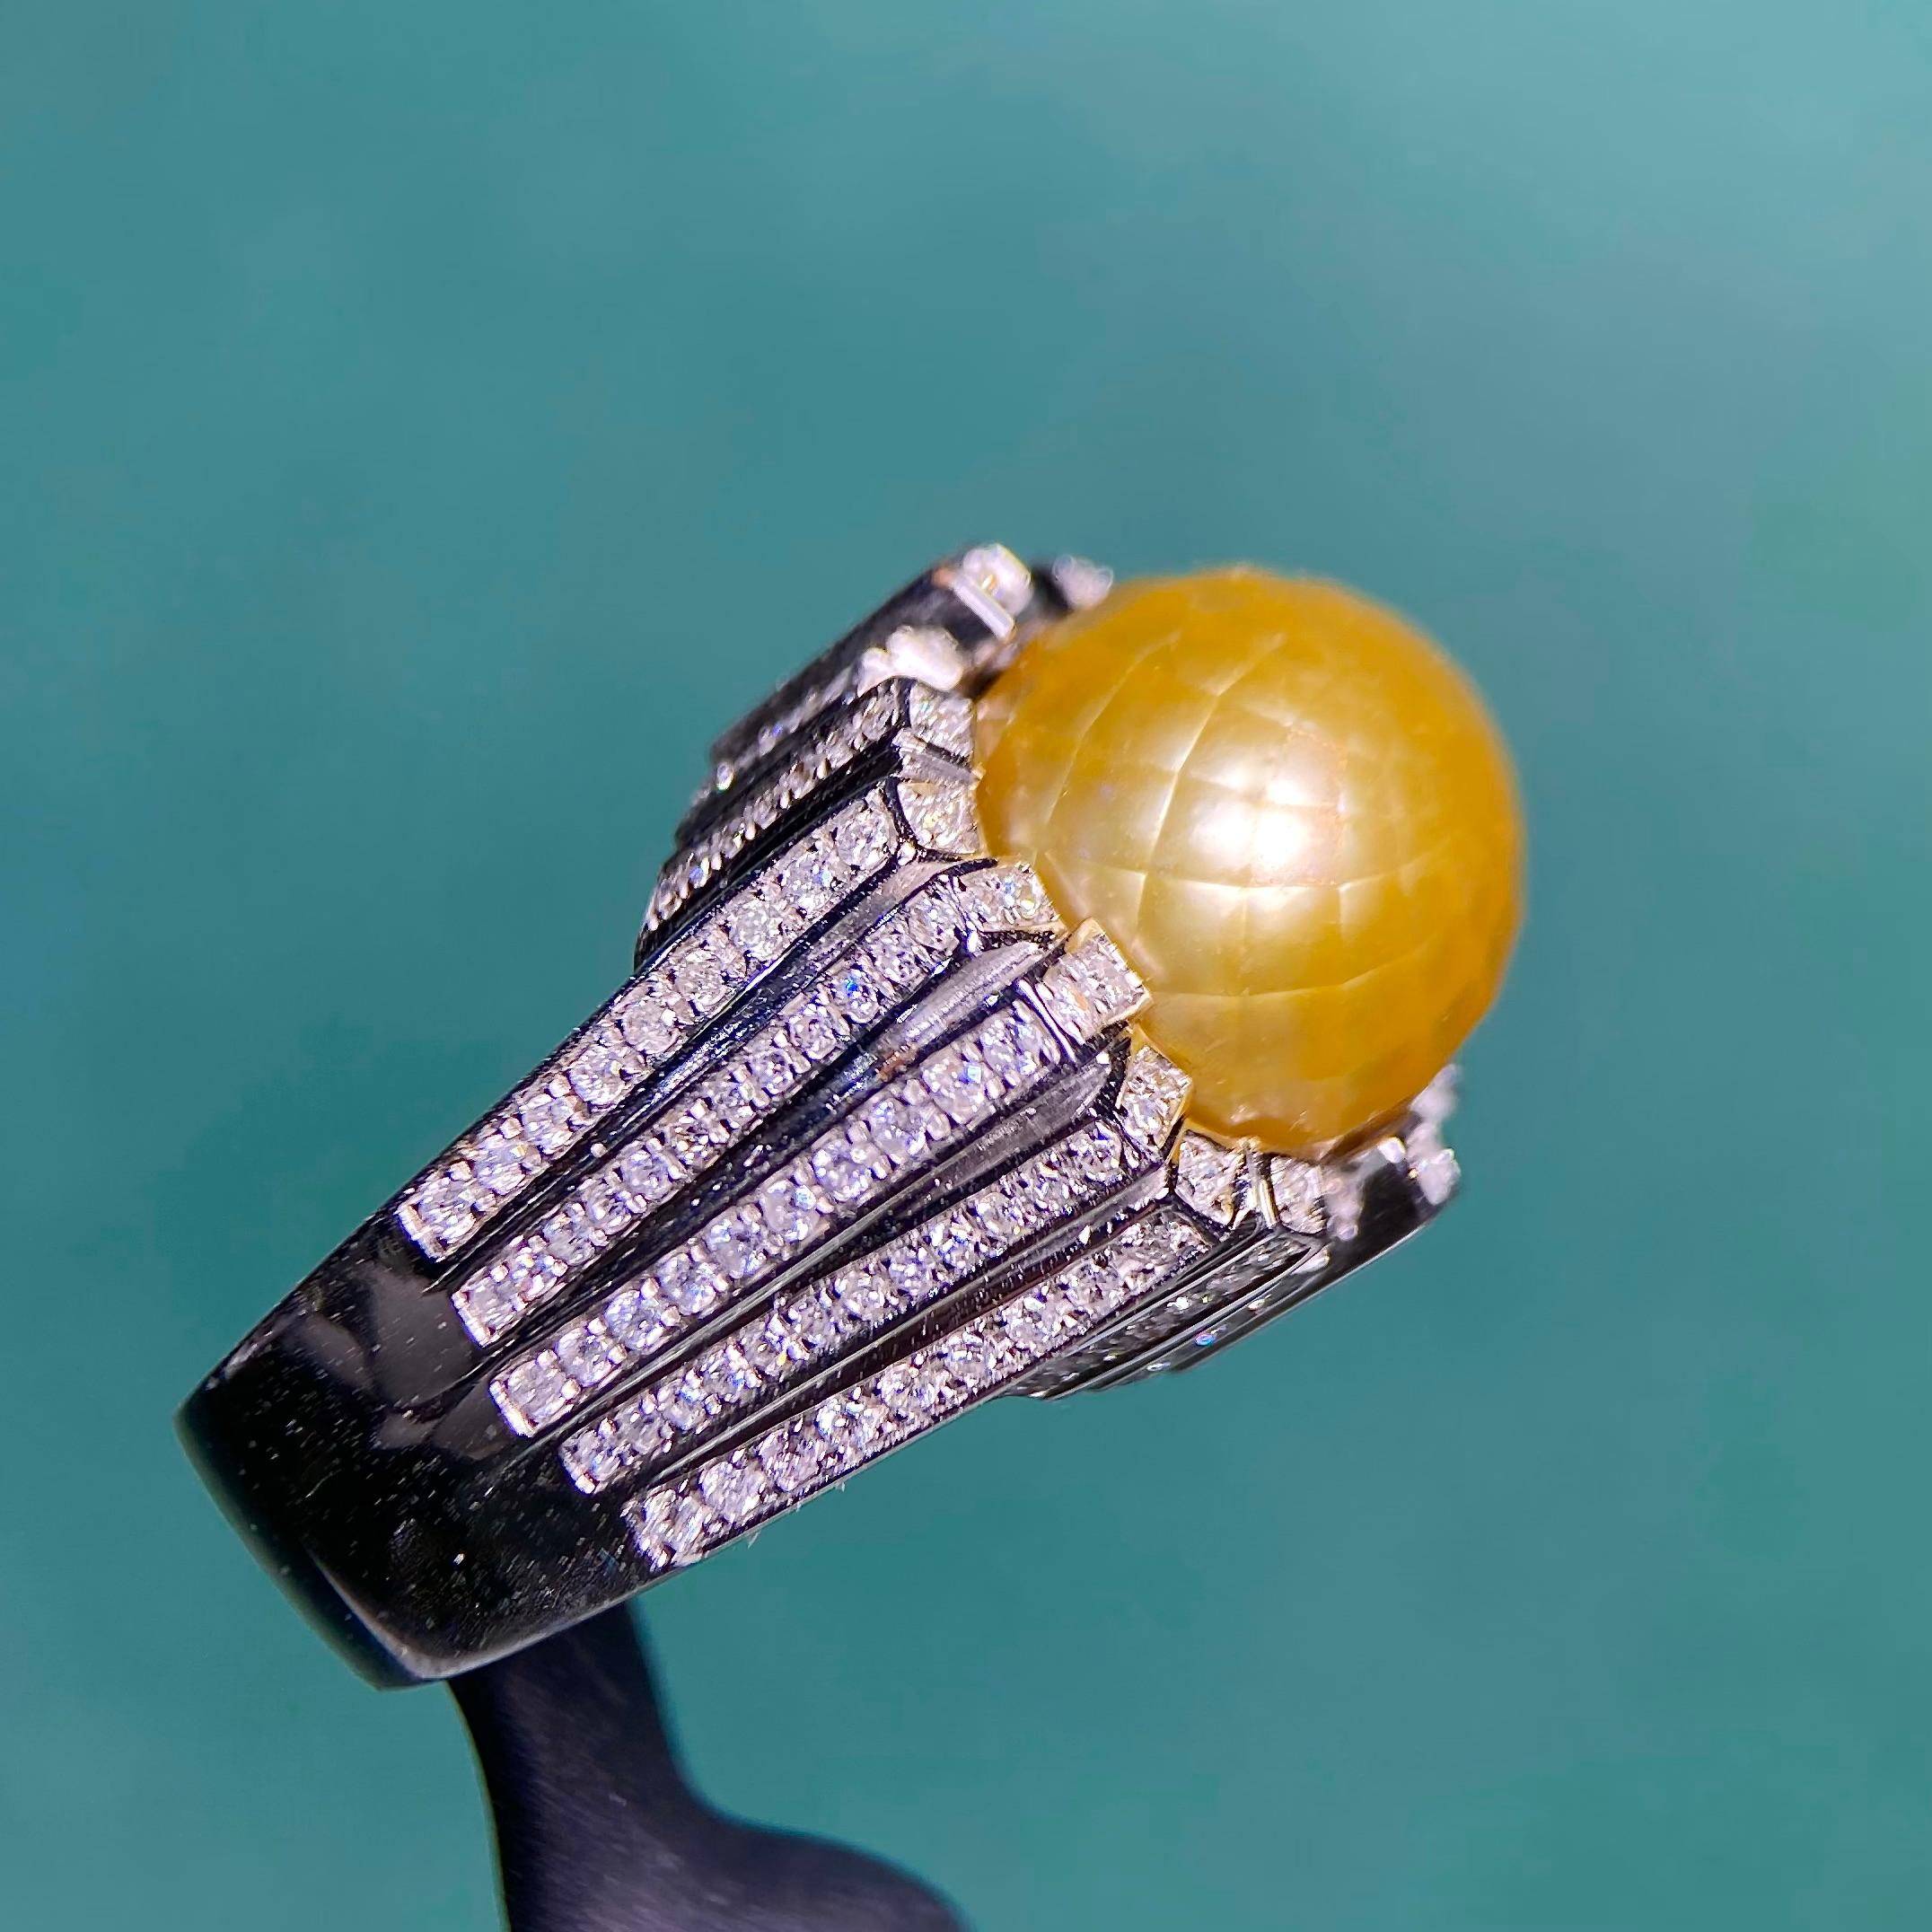 The Faceted Golden South Sea Pearl is surrounded by Diamond set in Square and Rectangle Geometric design. This is a very interesting piece as the surface of the Round pearl is no longer smooth but aggregated by multiple micro Diamond-shape like